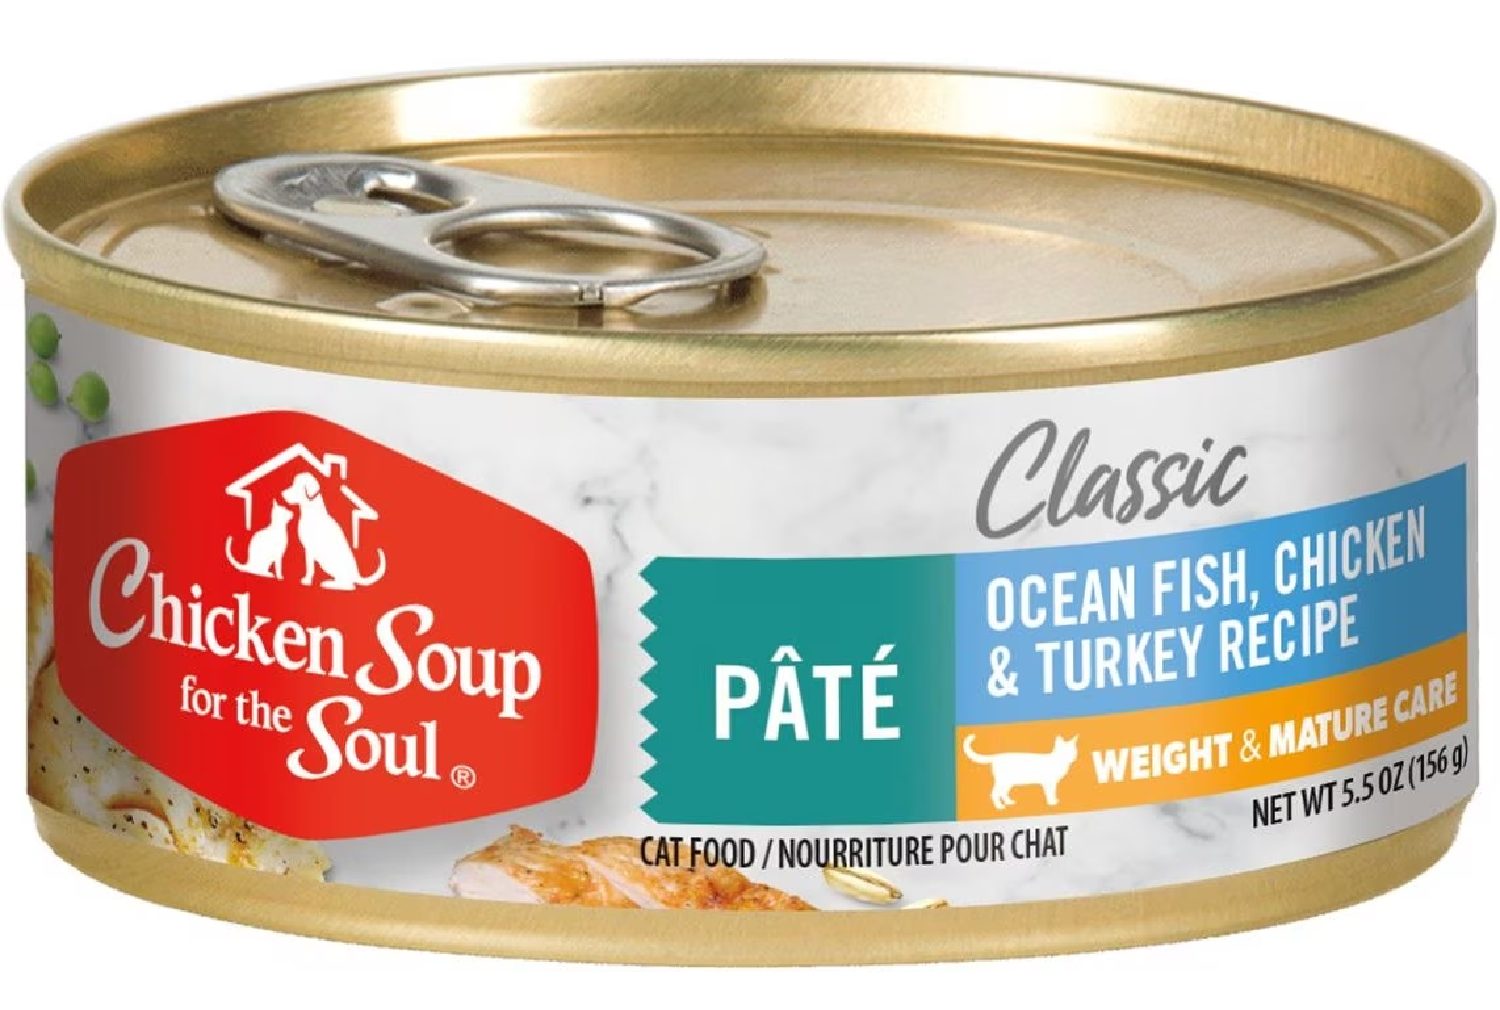 Chicken Soup for the Soul Weight & Mature Care Ocean Fish, Chicken & Turkey Recipe Pâté Canned Cat Food